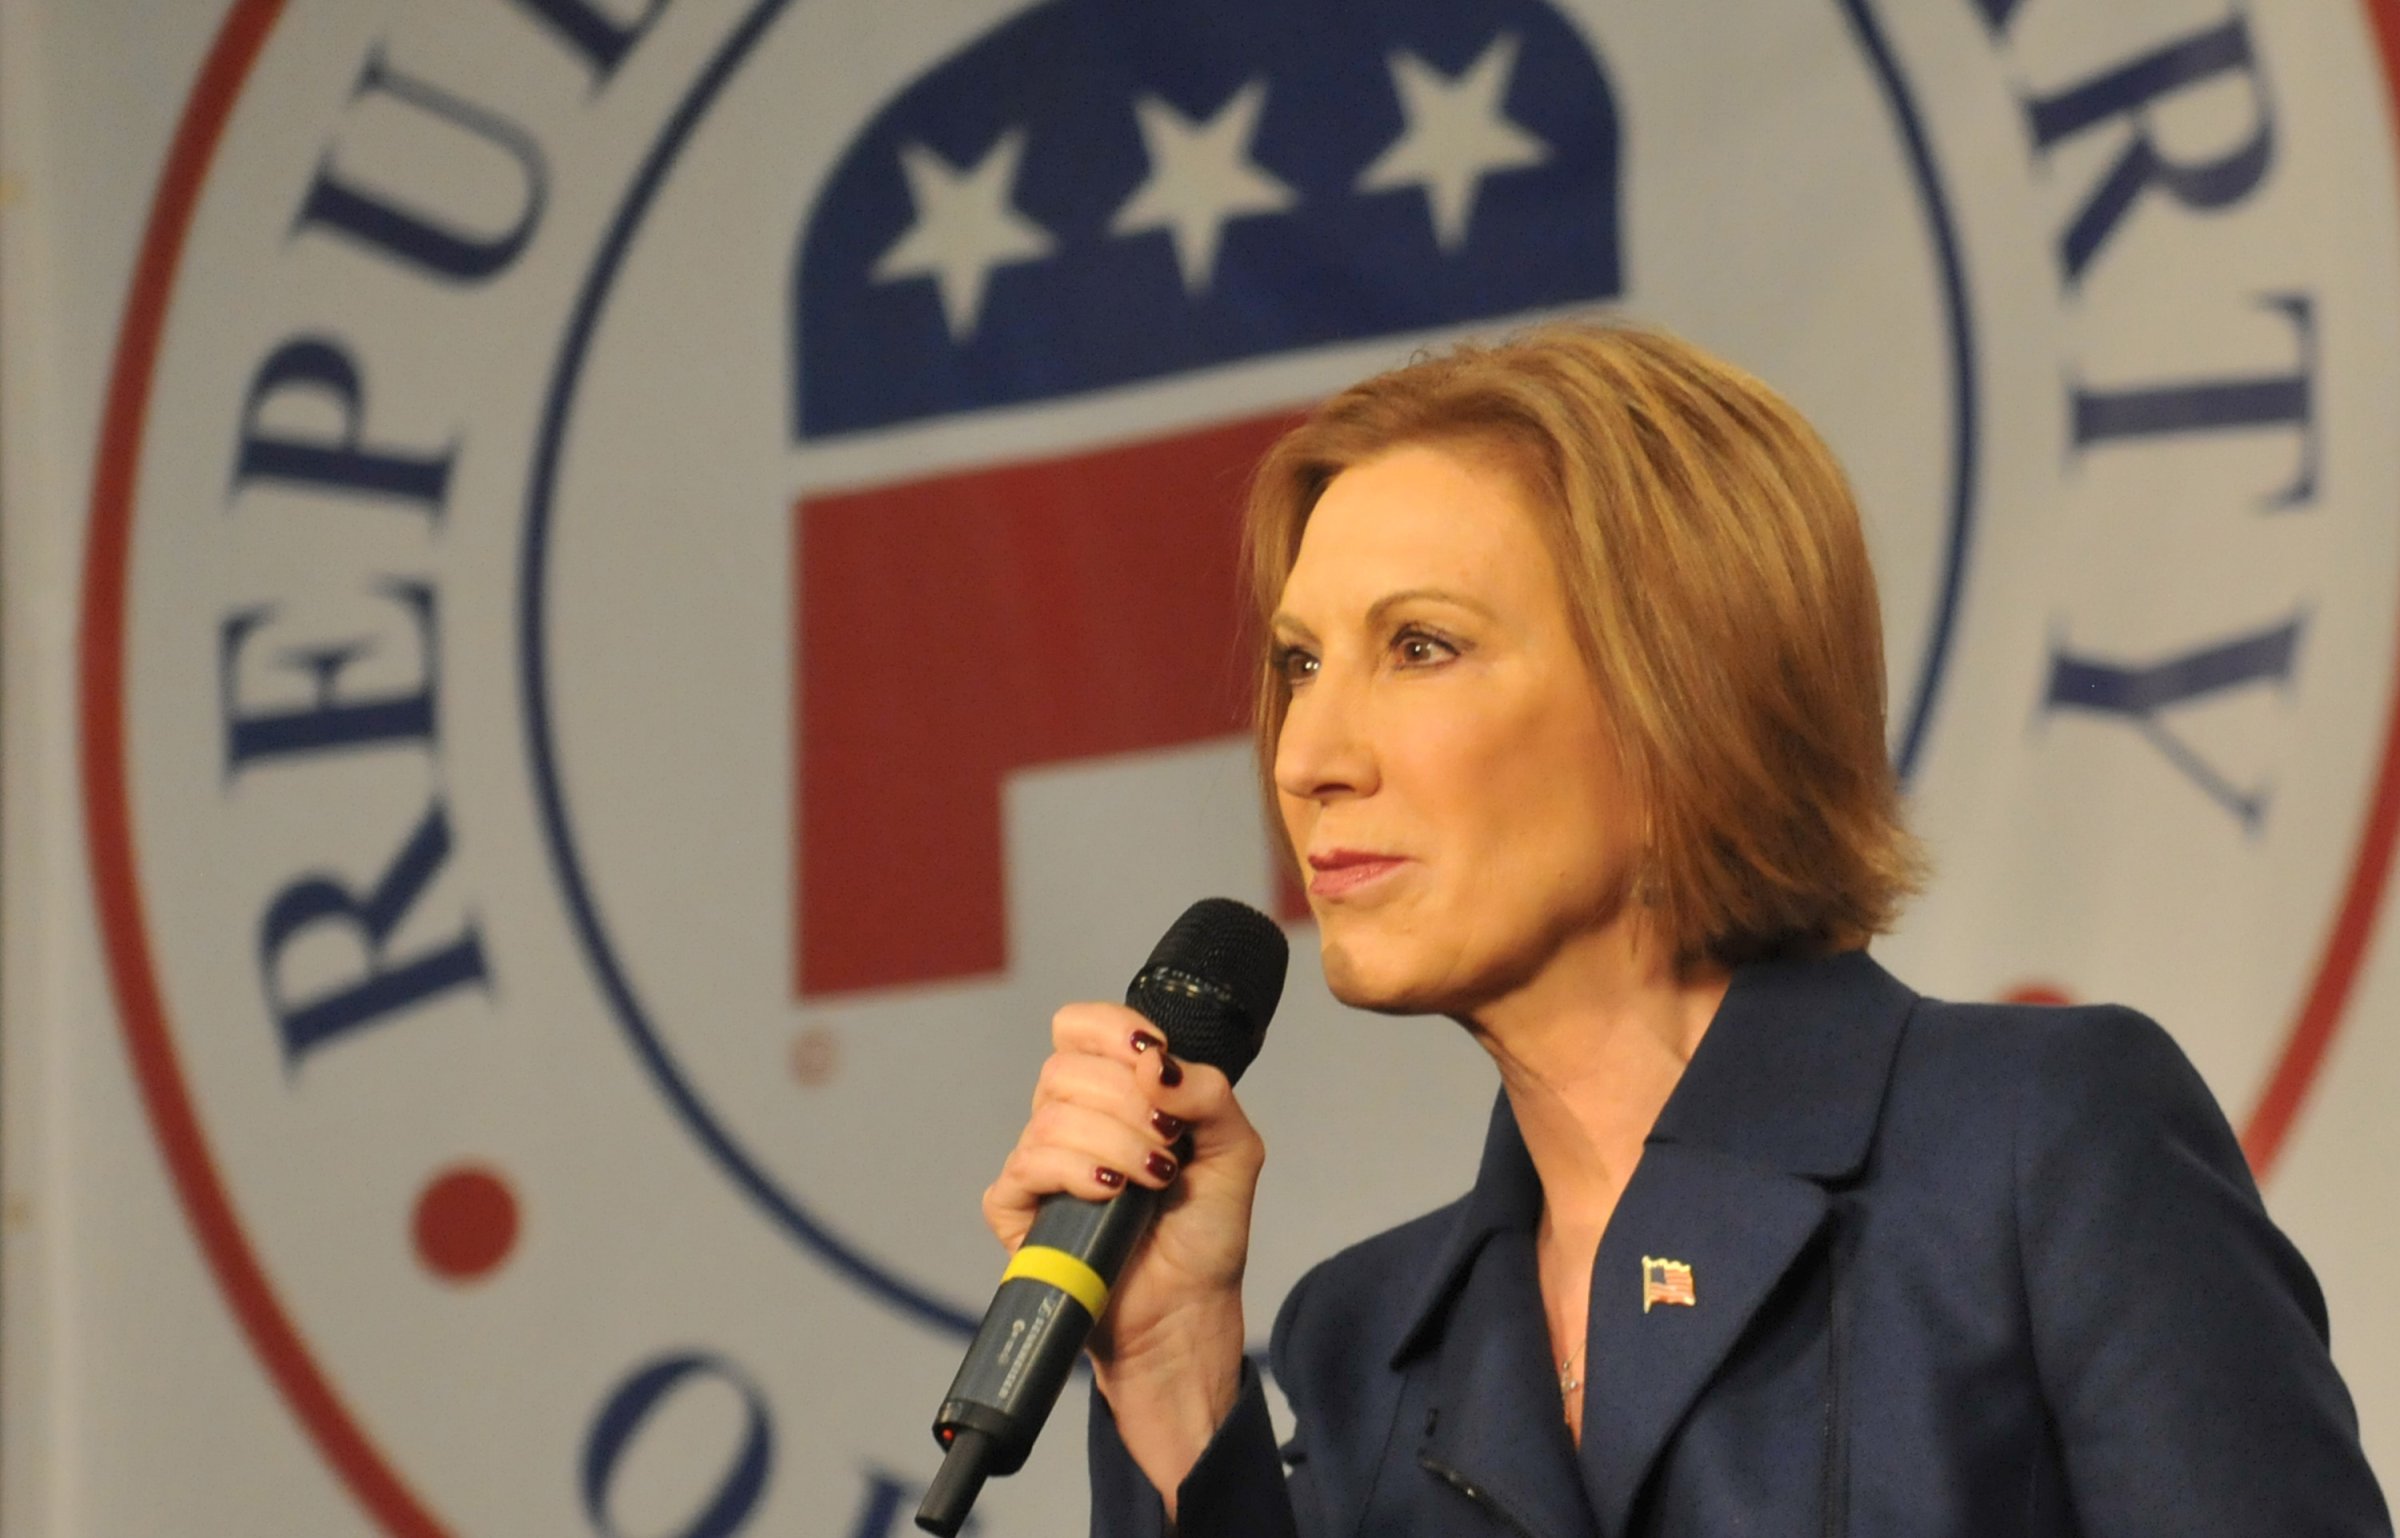 Republican presidential candidate Carly Fiorina speaks at the Growth and Opportunity Party, at the Iowa State Fair on Oct. 31, 2015.